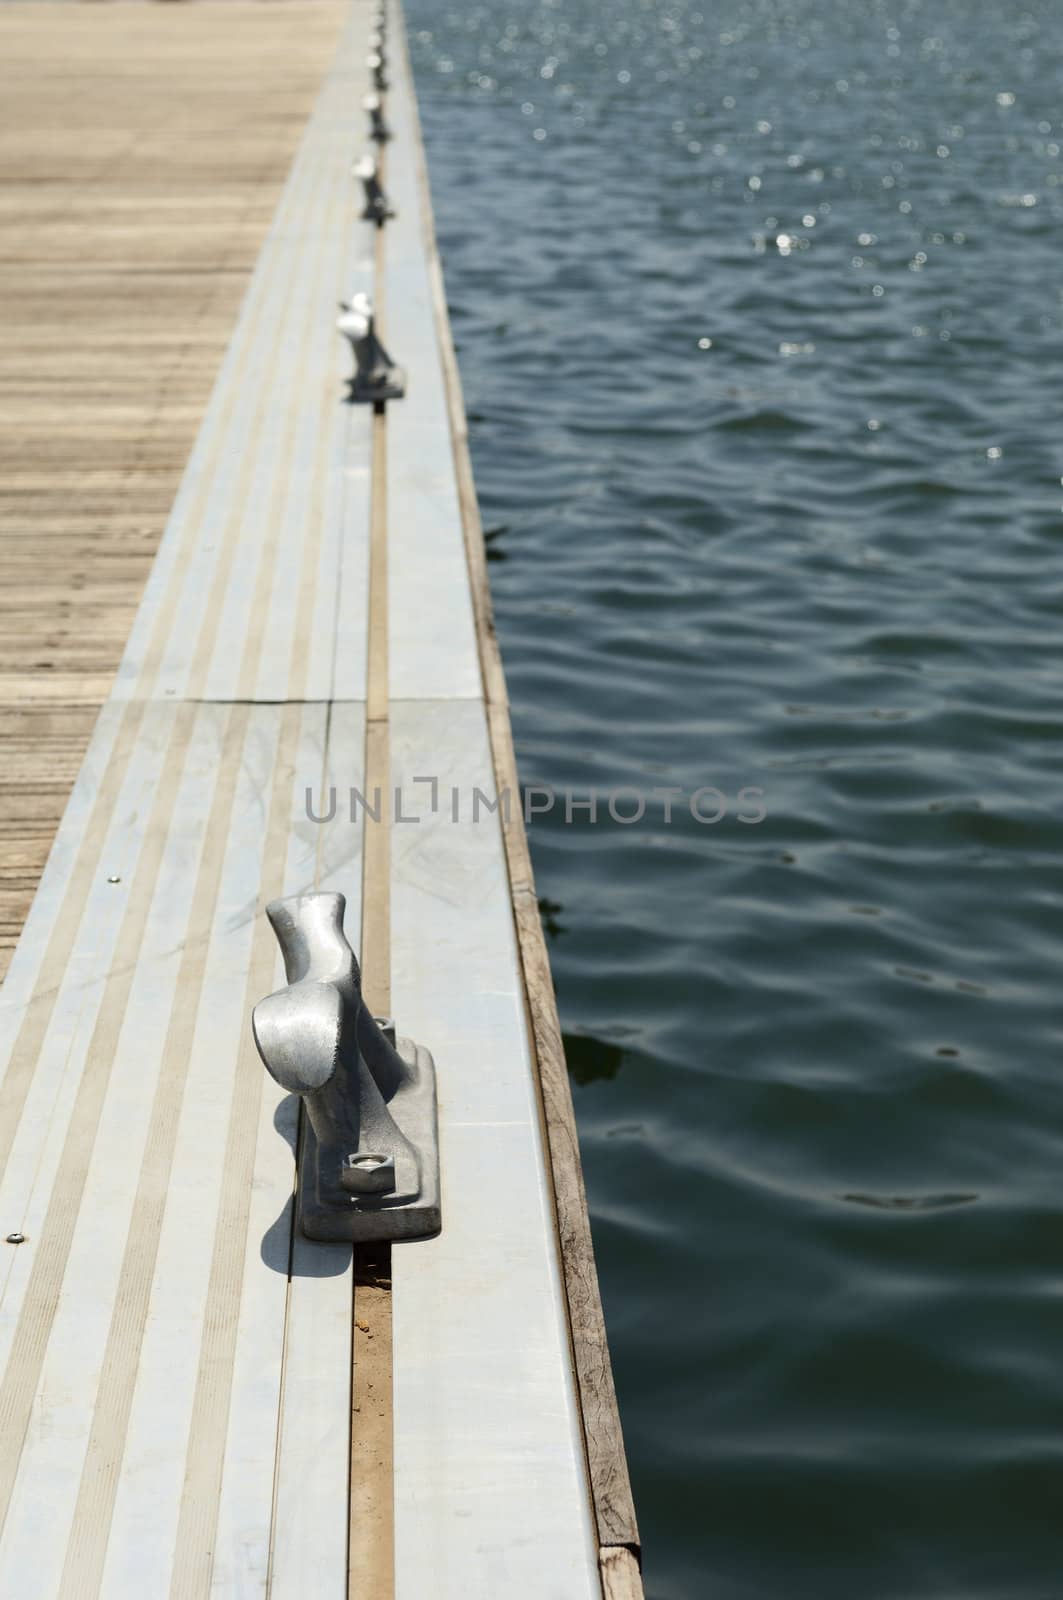 Detail of a wooden floating dock with mooring bitts